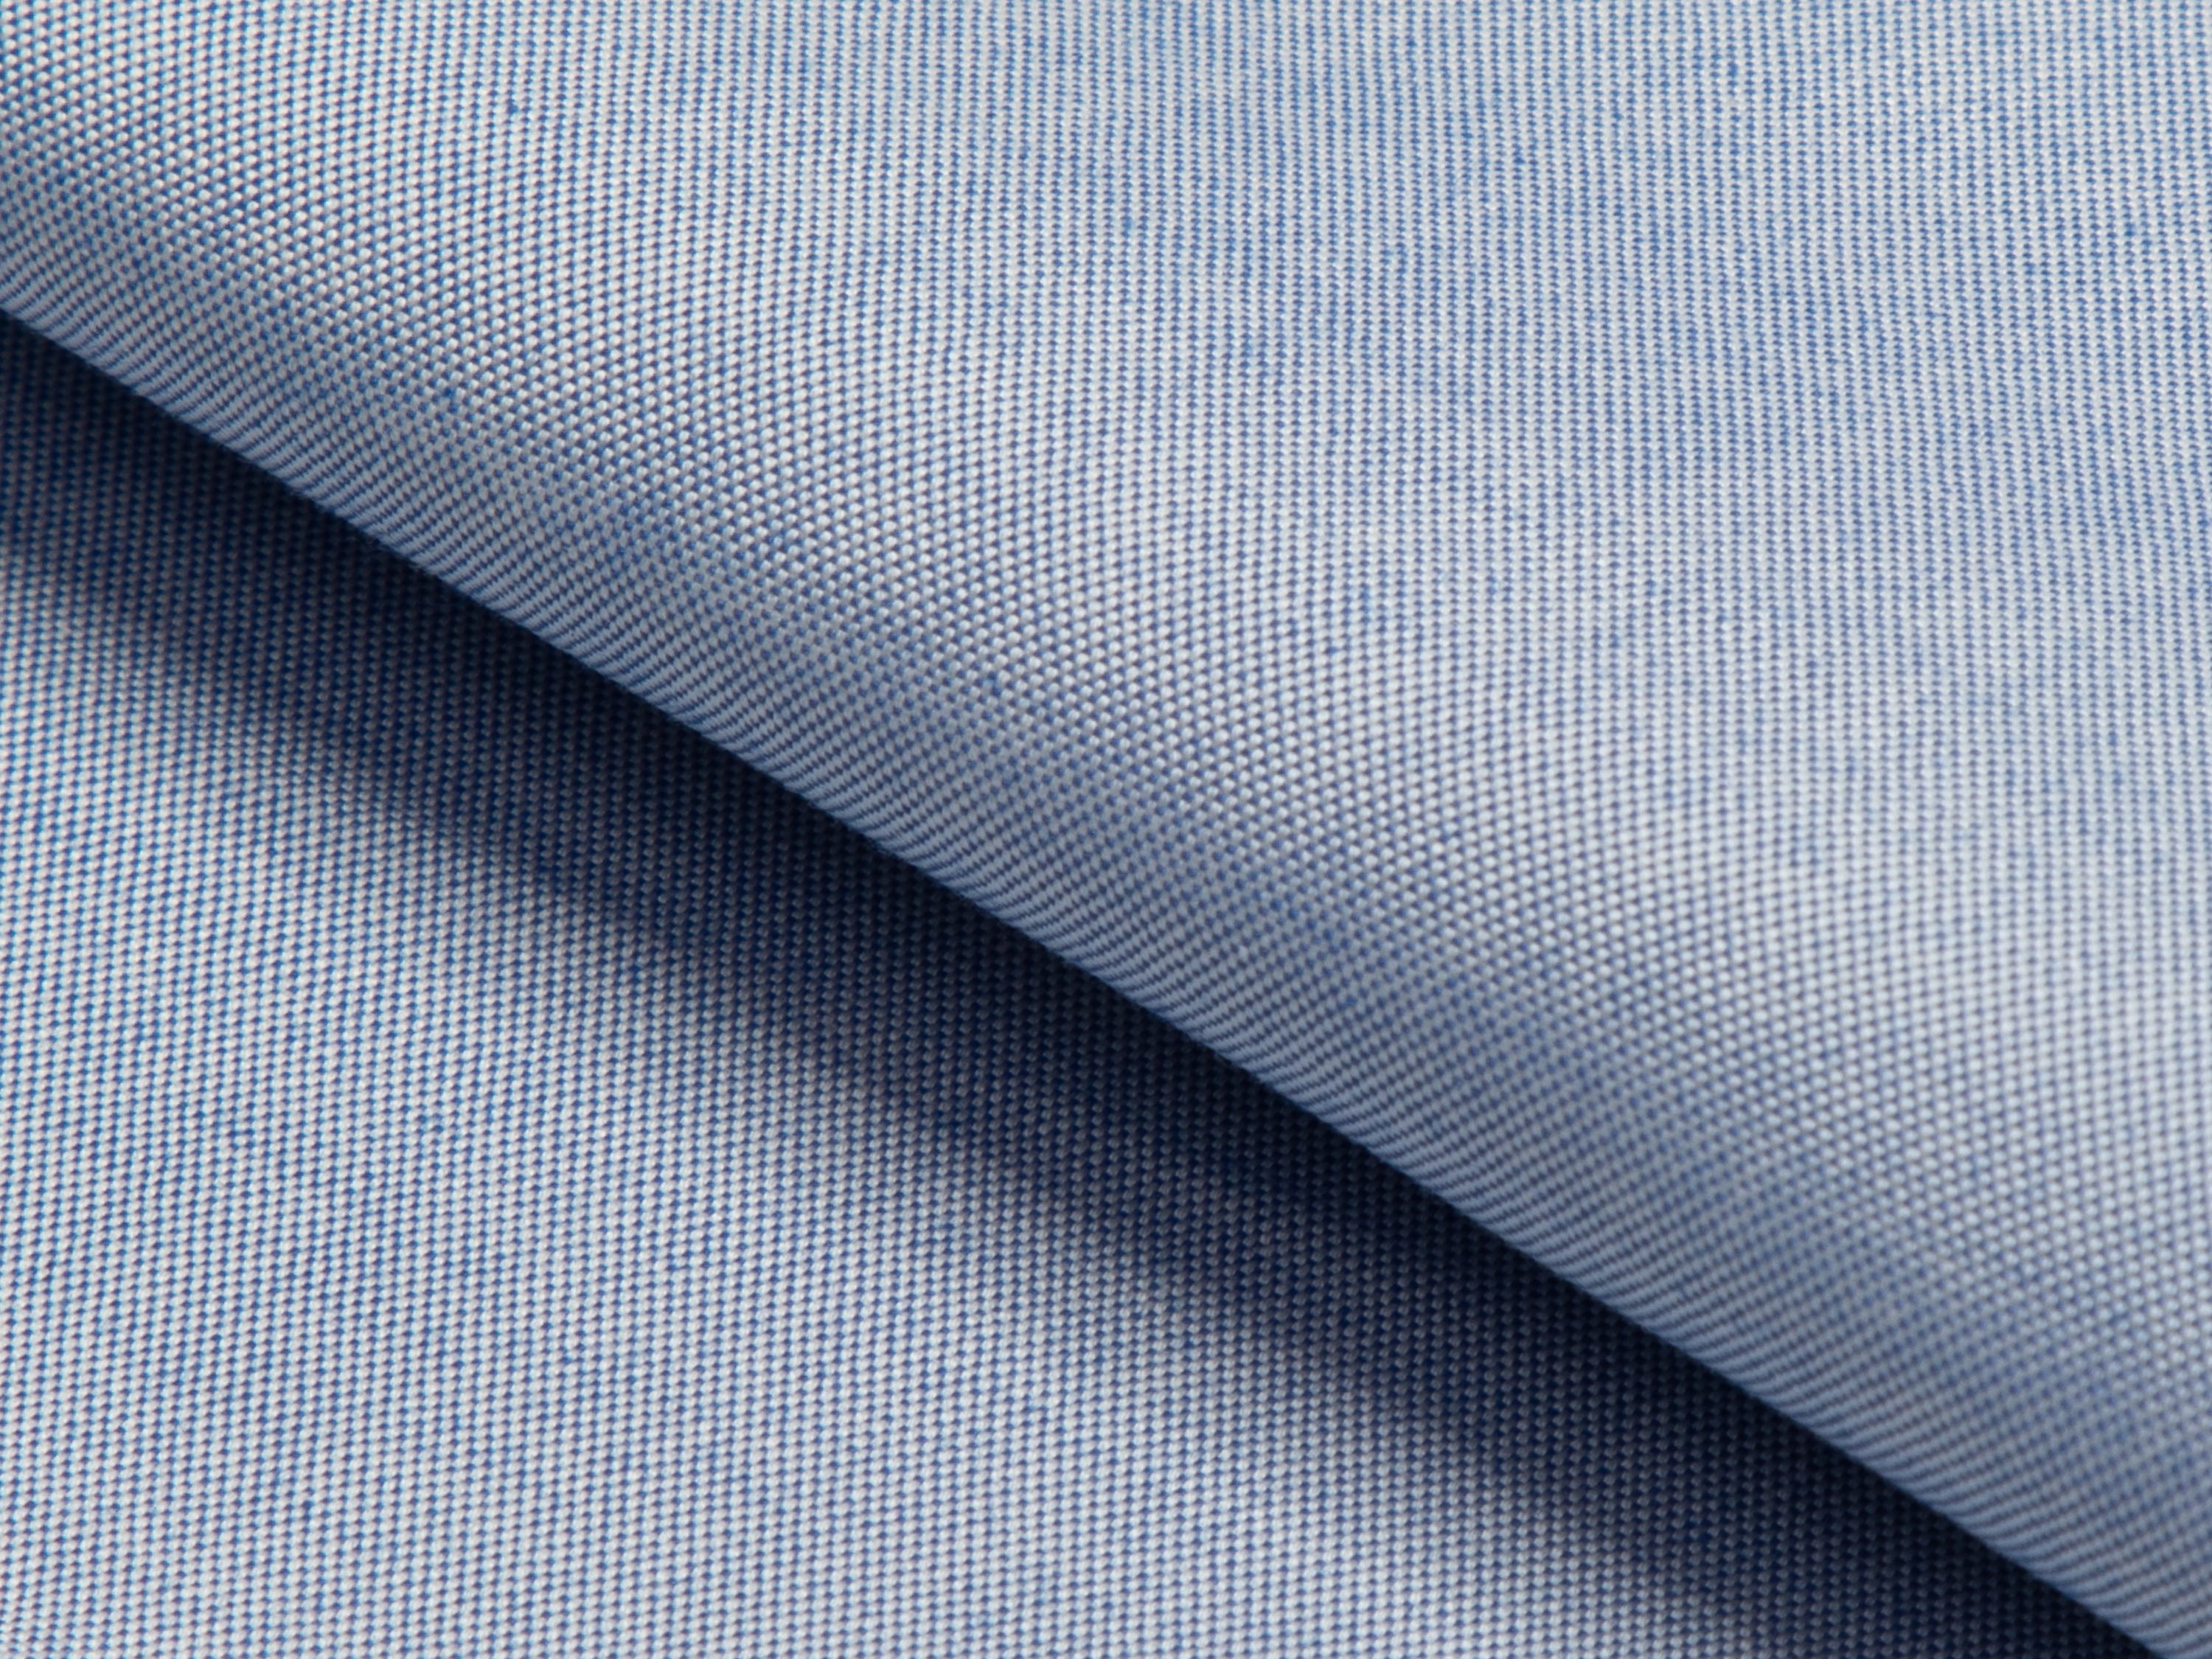 Buy tailor made shirts online - PINPOINT LUXURY - Pinpoint Denim Blue